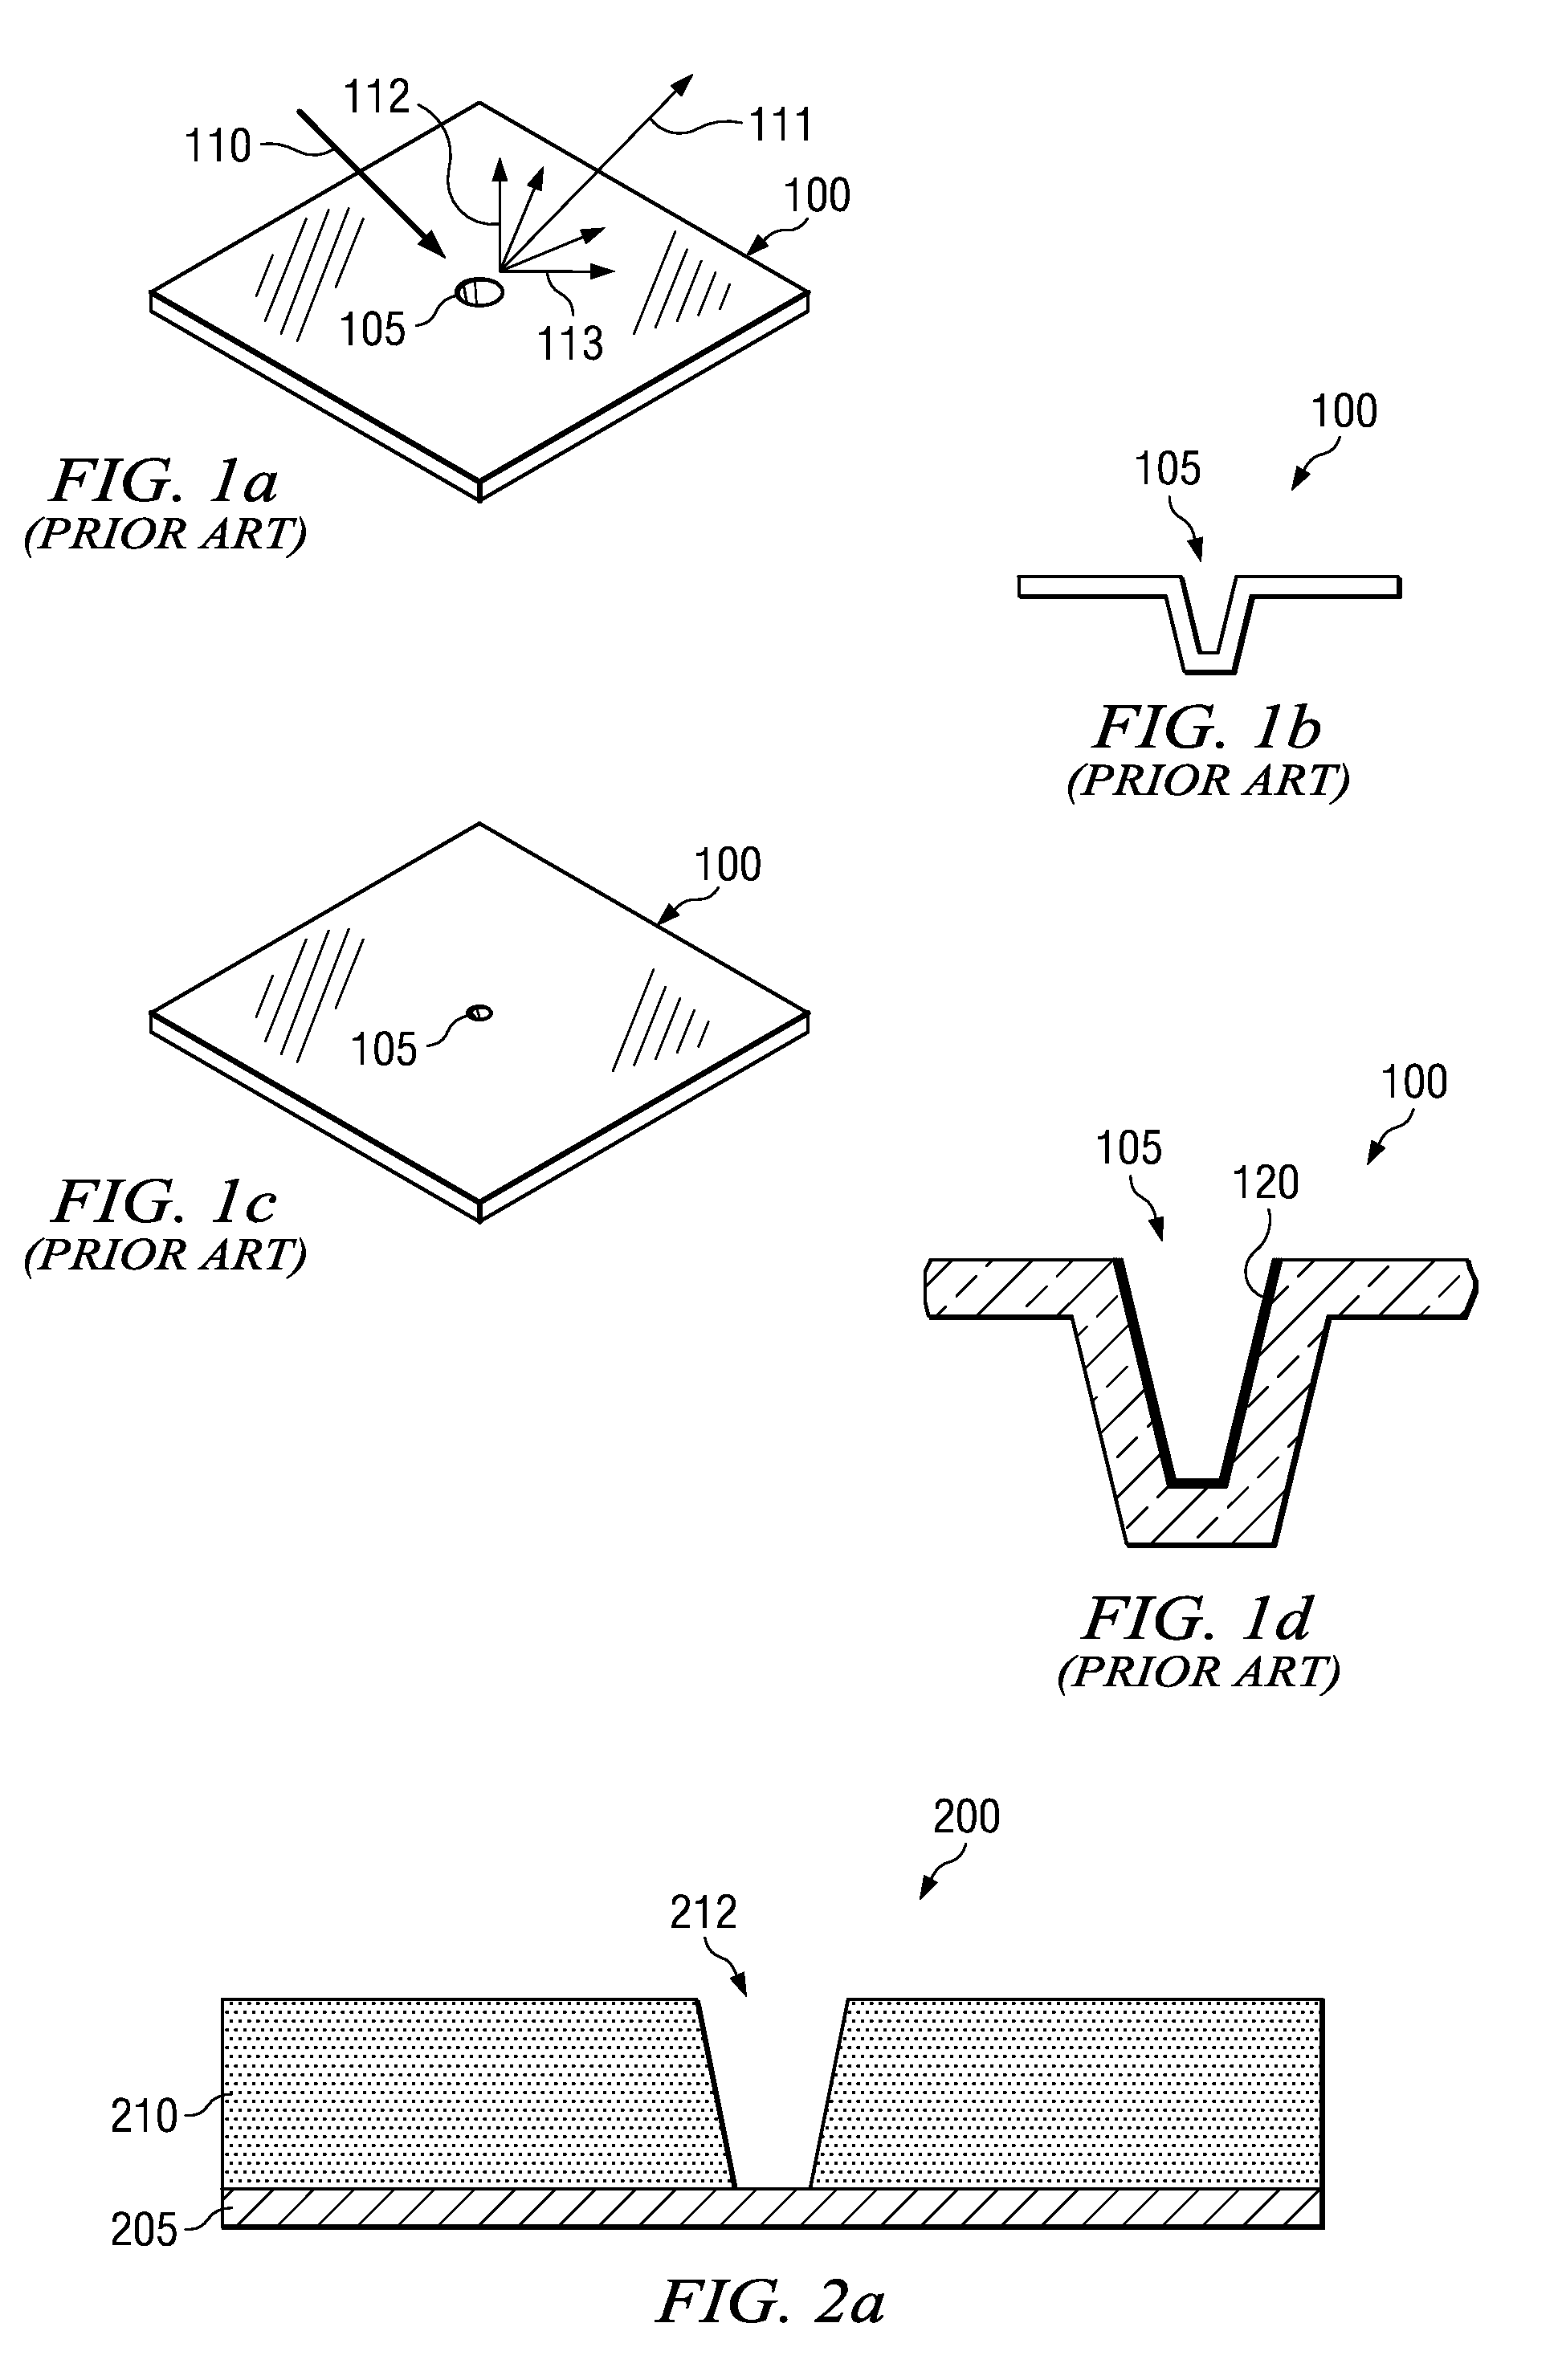 System and method for increasing image quality in a display system